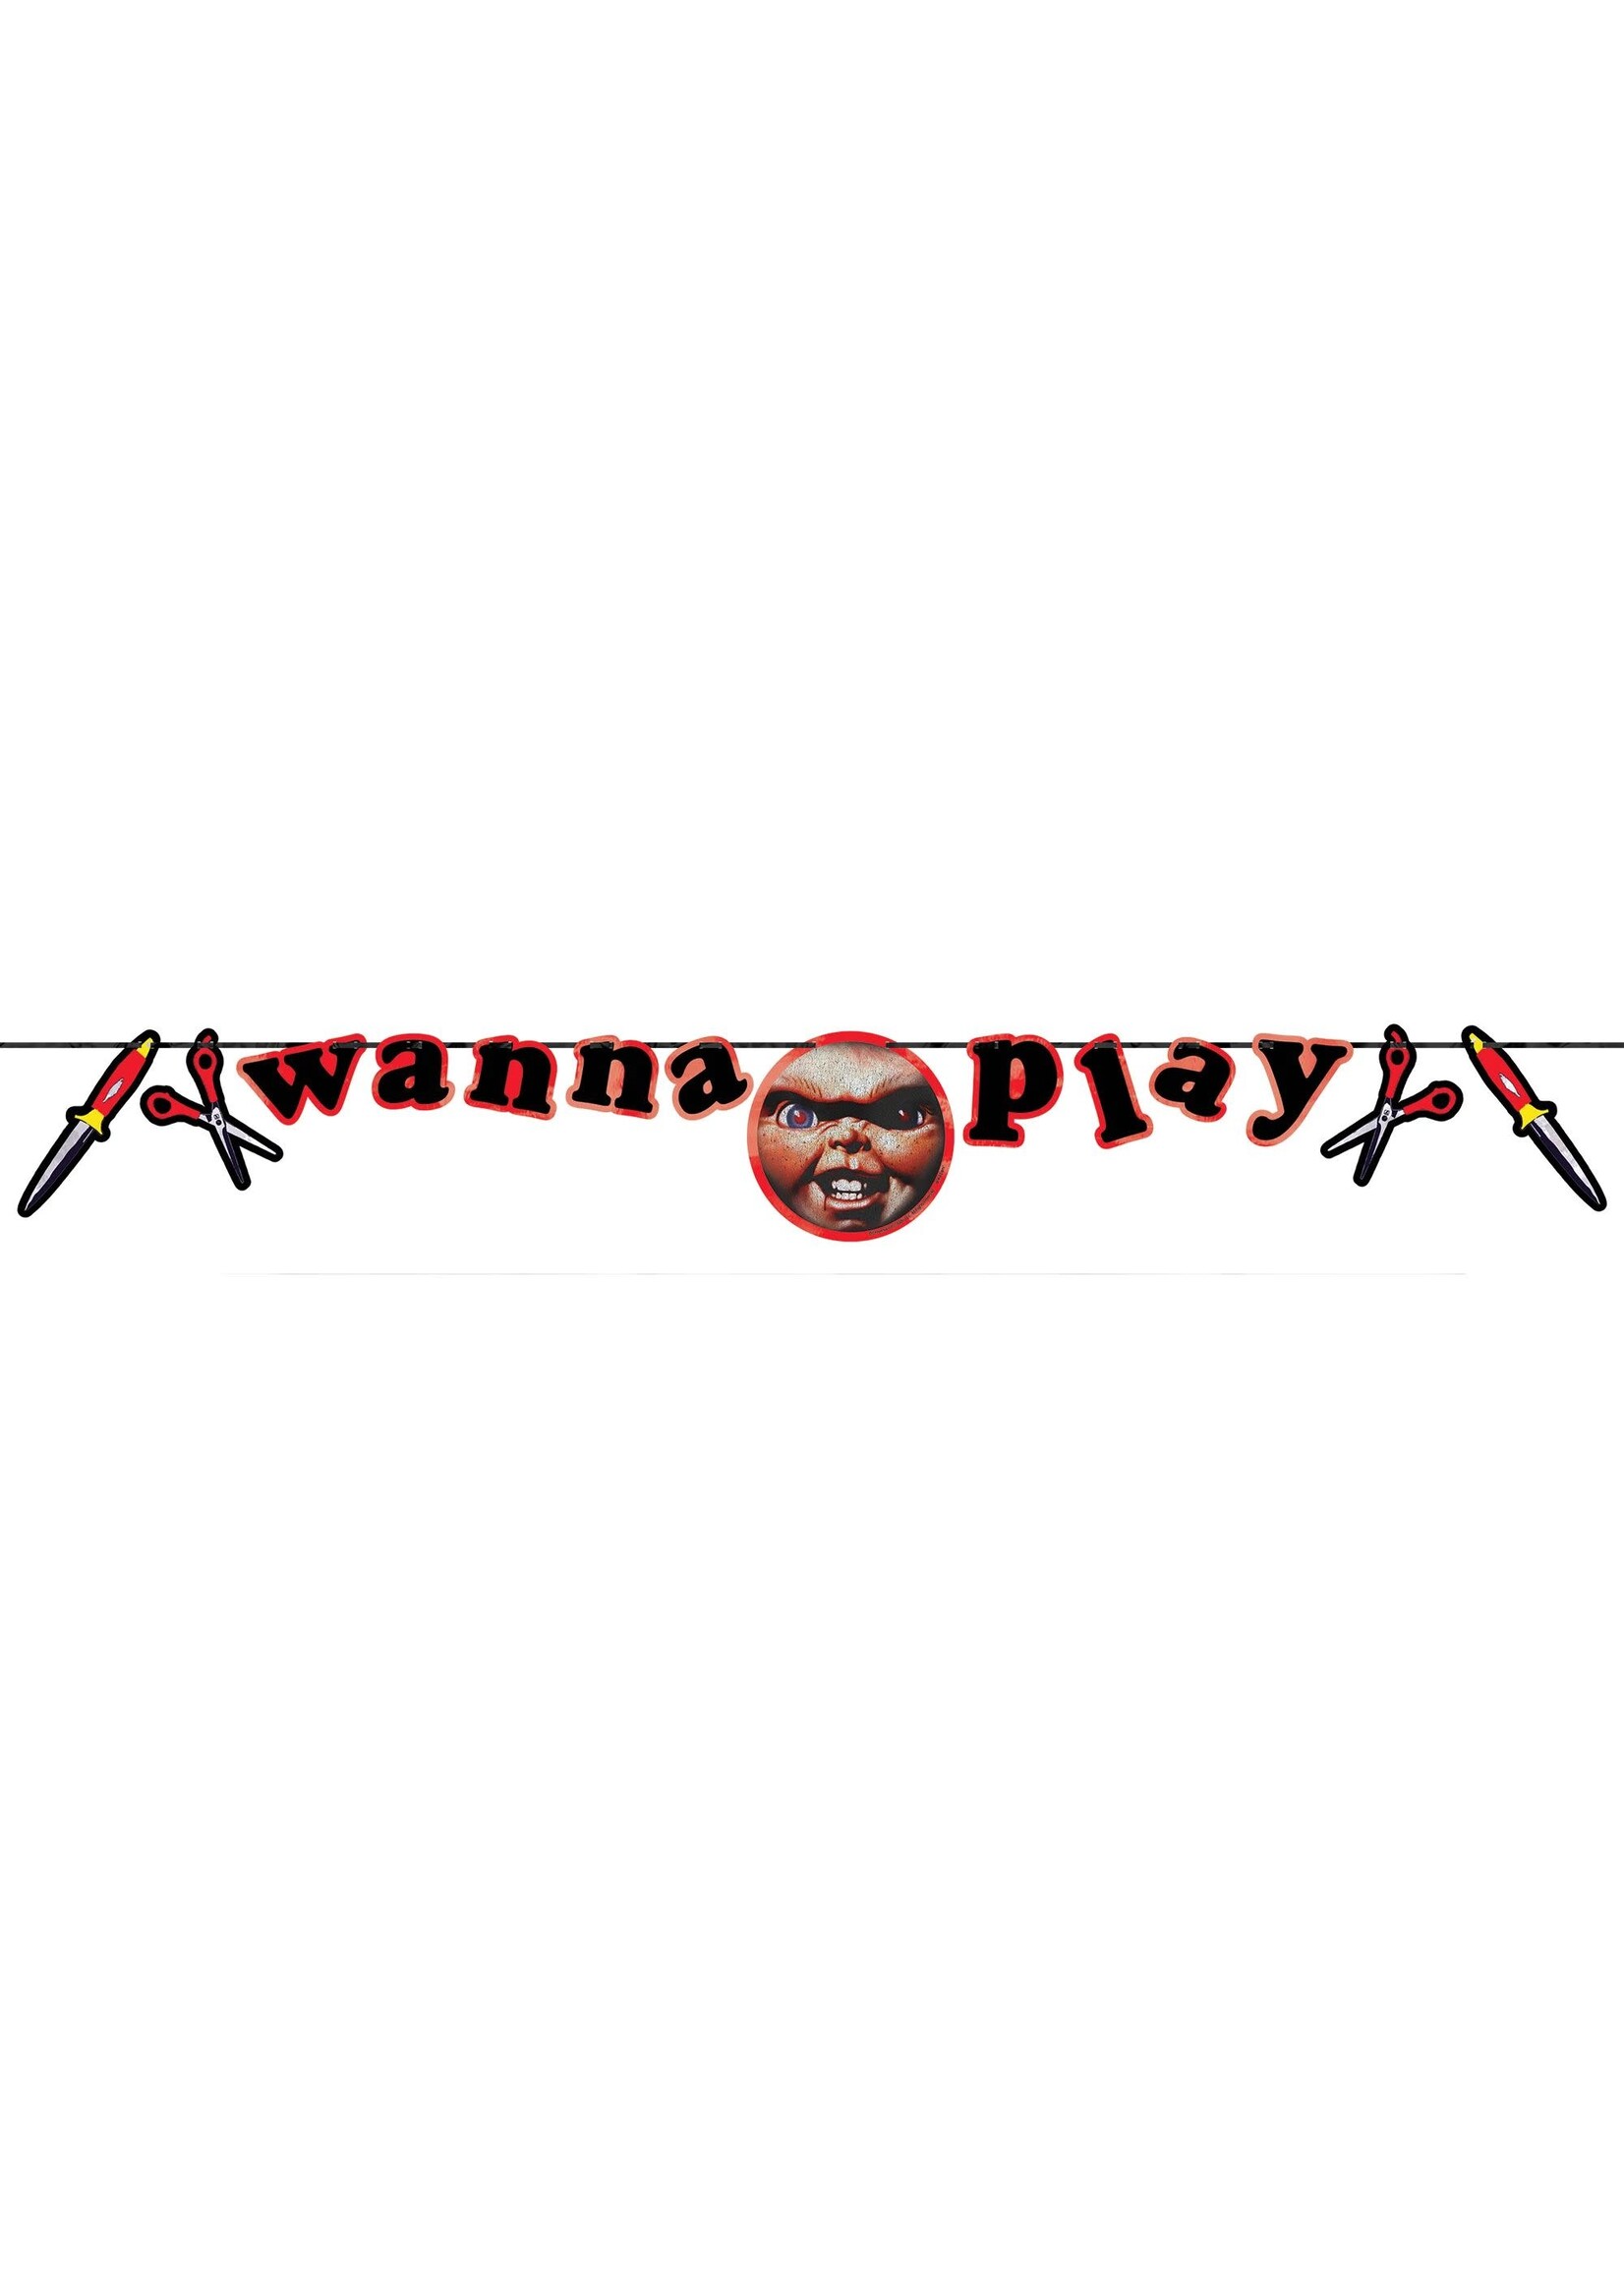 Child's Play Chucky Banner